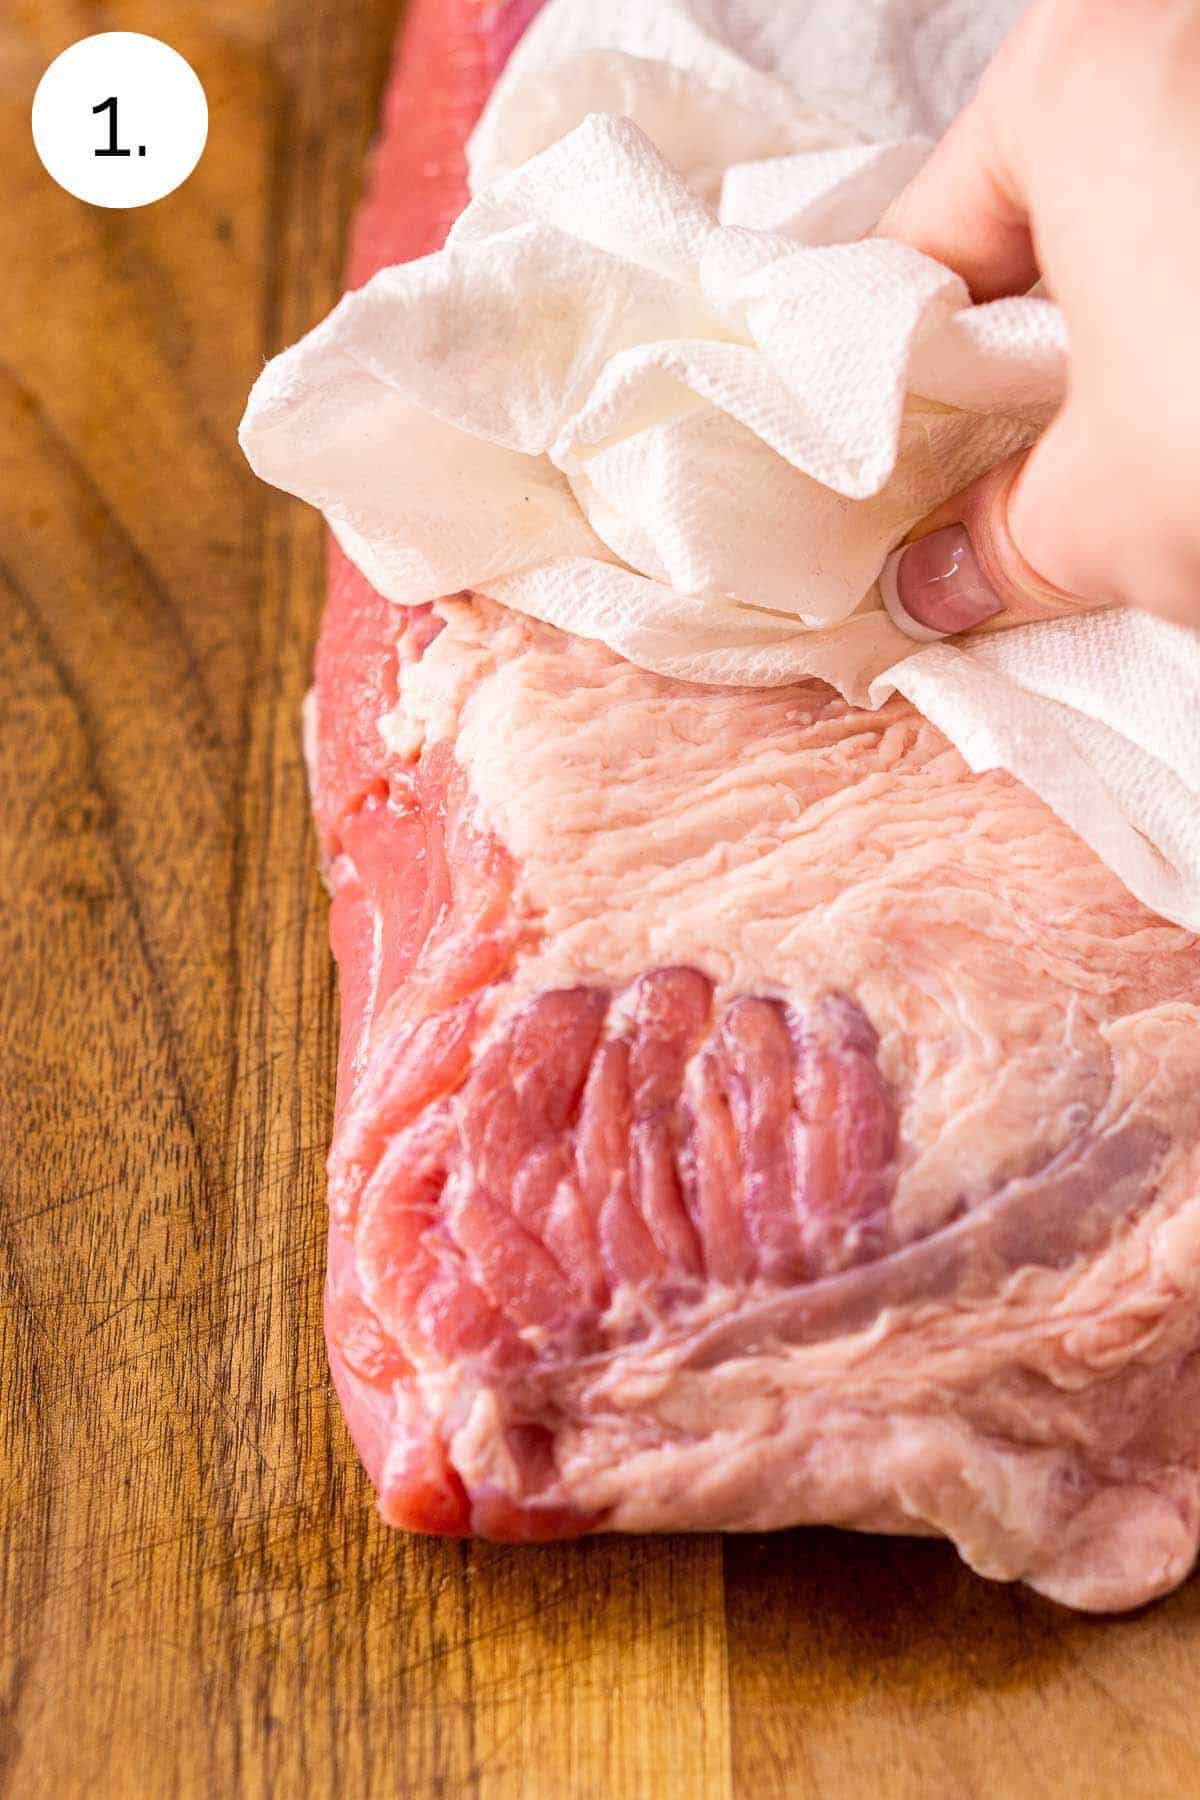 A hand blotting the corned beef dry with a paper towel on a brown cutting board after rinsing in cold water.